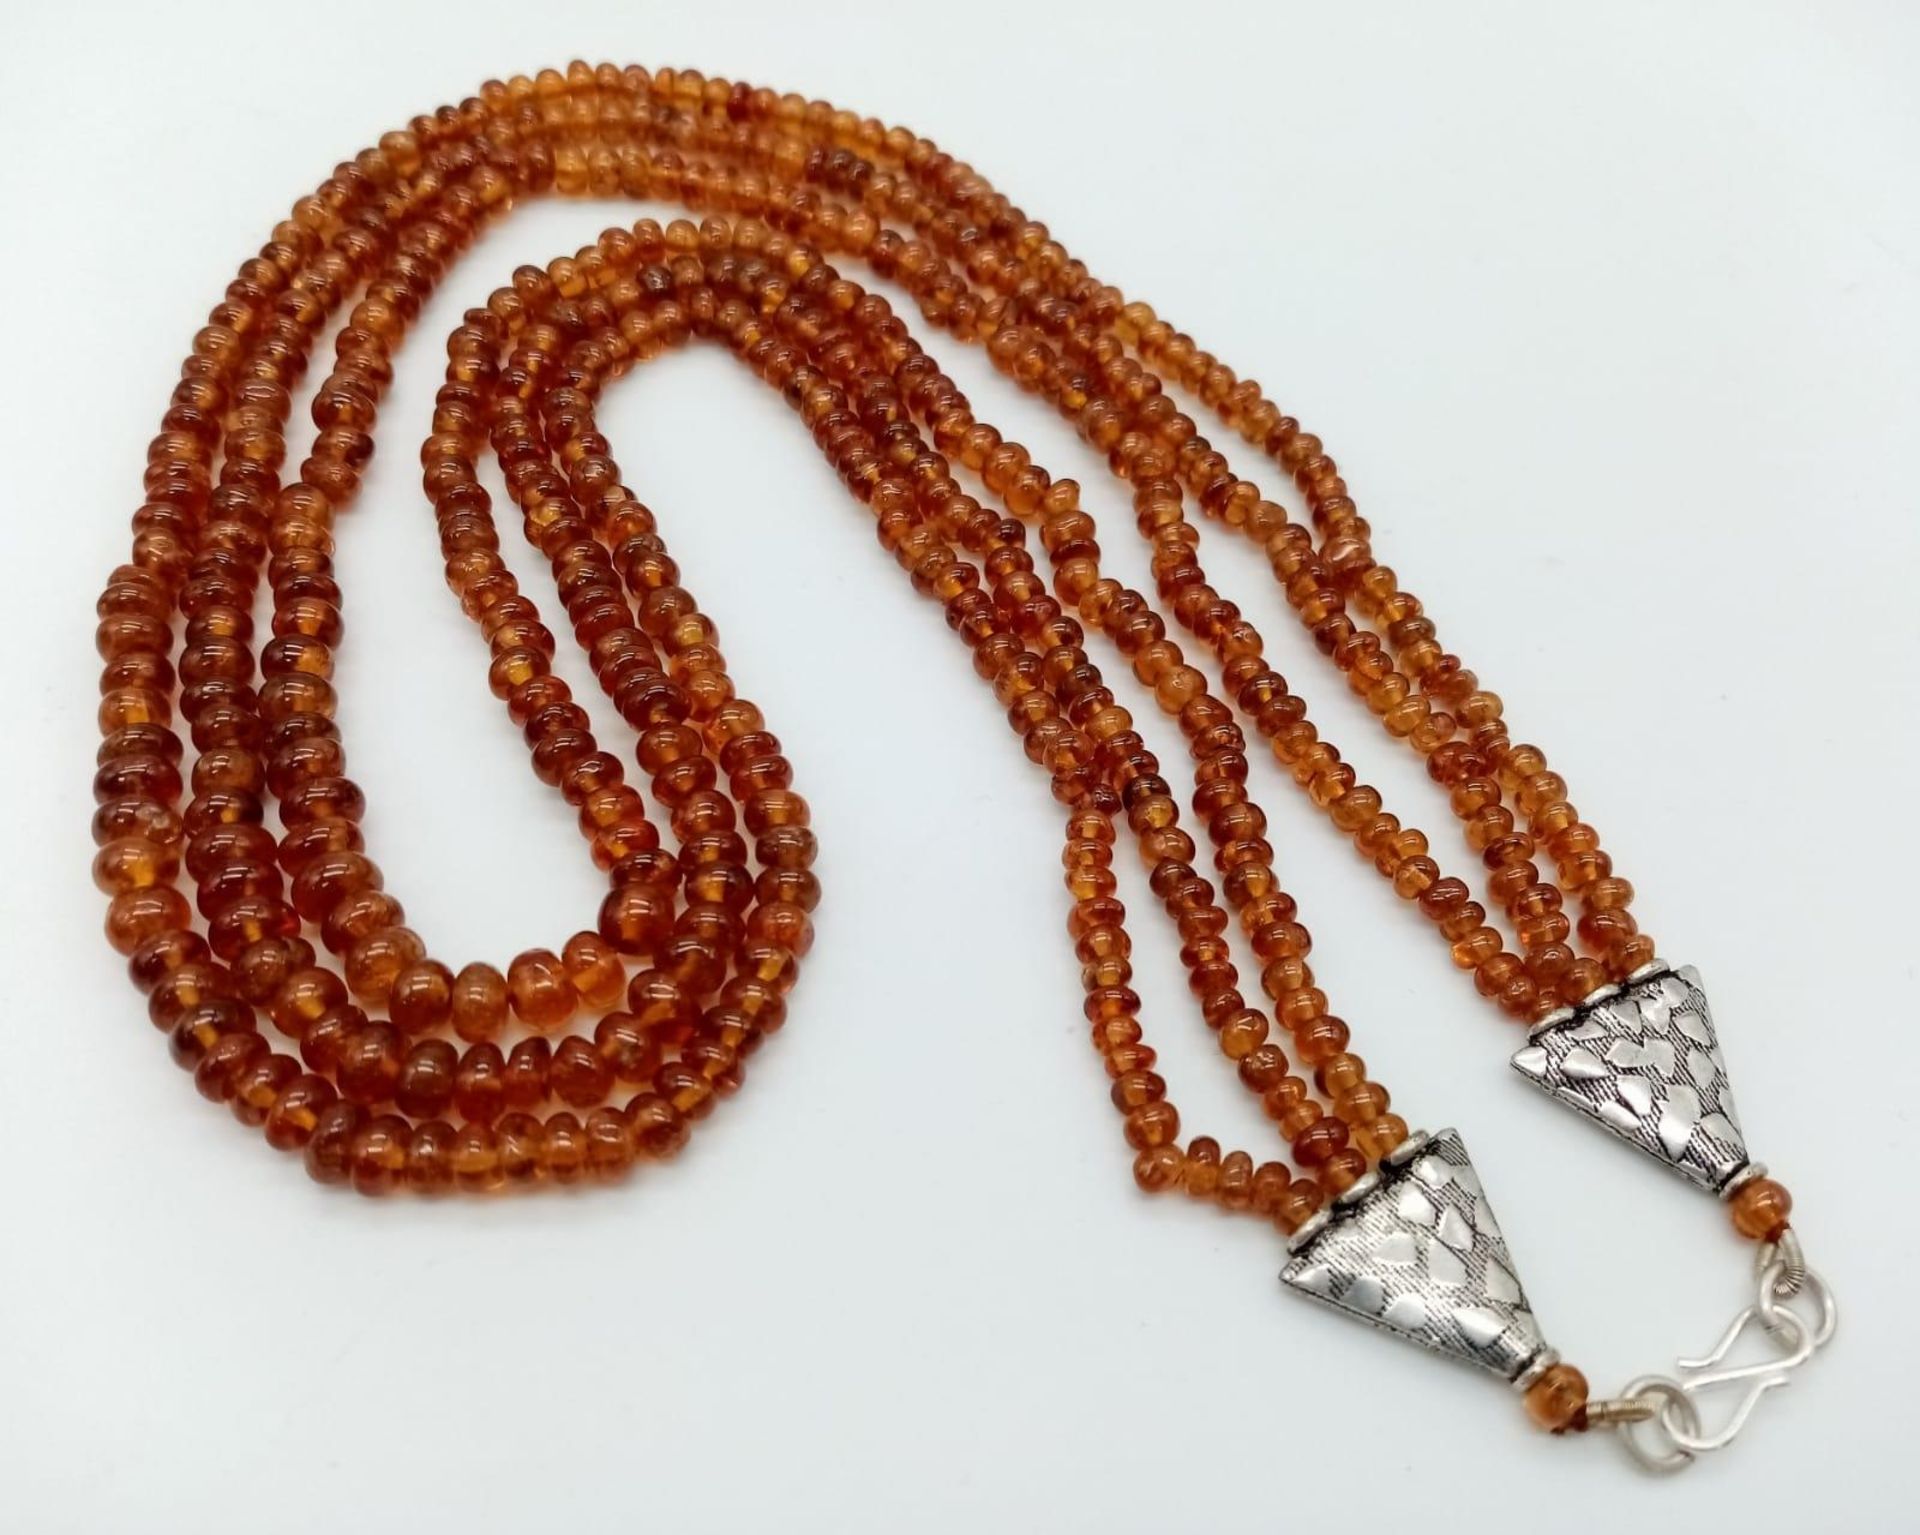 A Three Row Hessonite Garnet Small Rondelle Bead Necklace. 245ctw. 925 Silver Clasp. 40-46cm length.